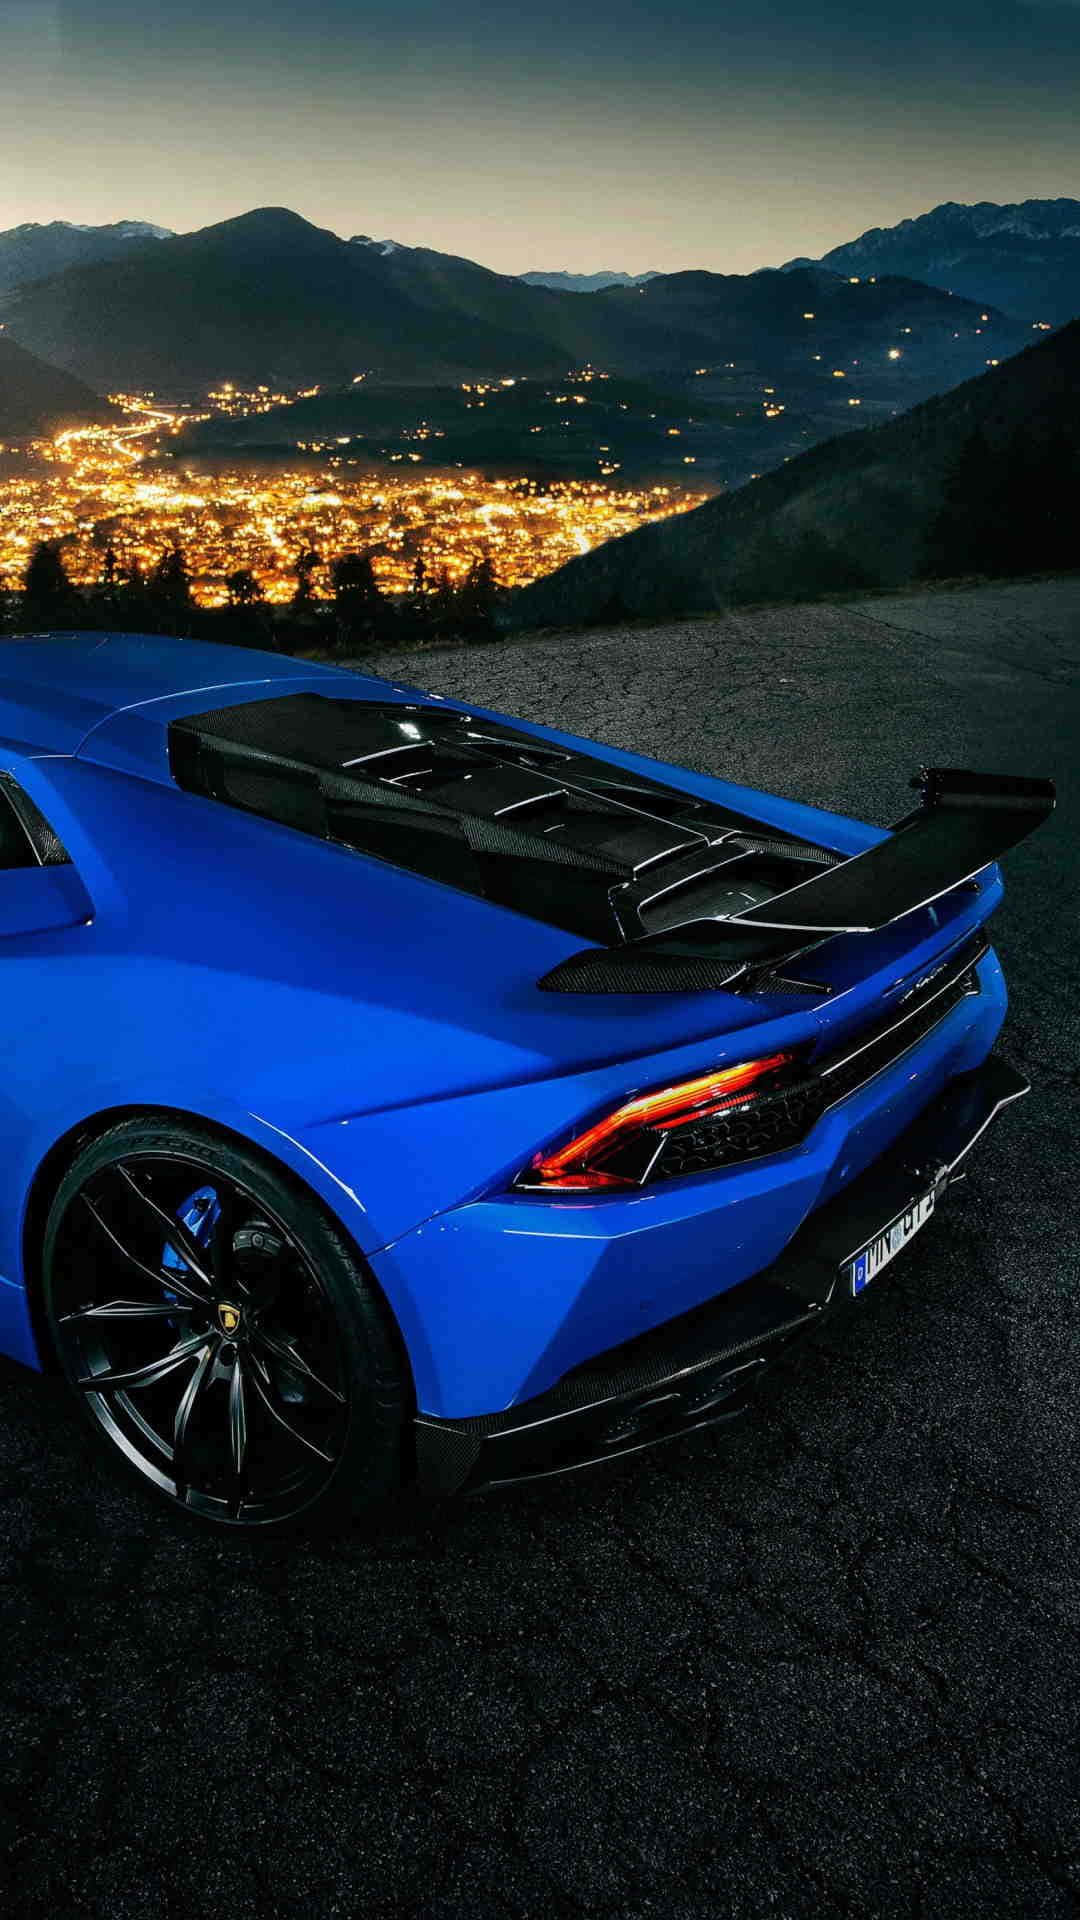 "Take a ride in this blue Lamborghini for a fun and exciting adventure." Wallpaper